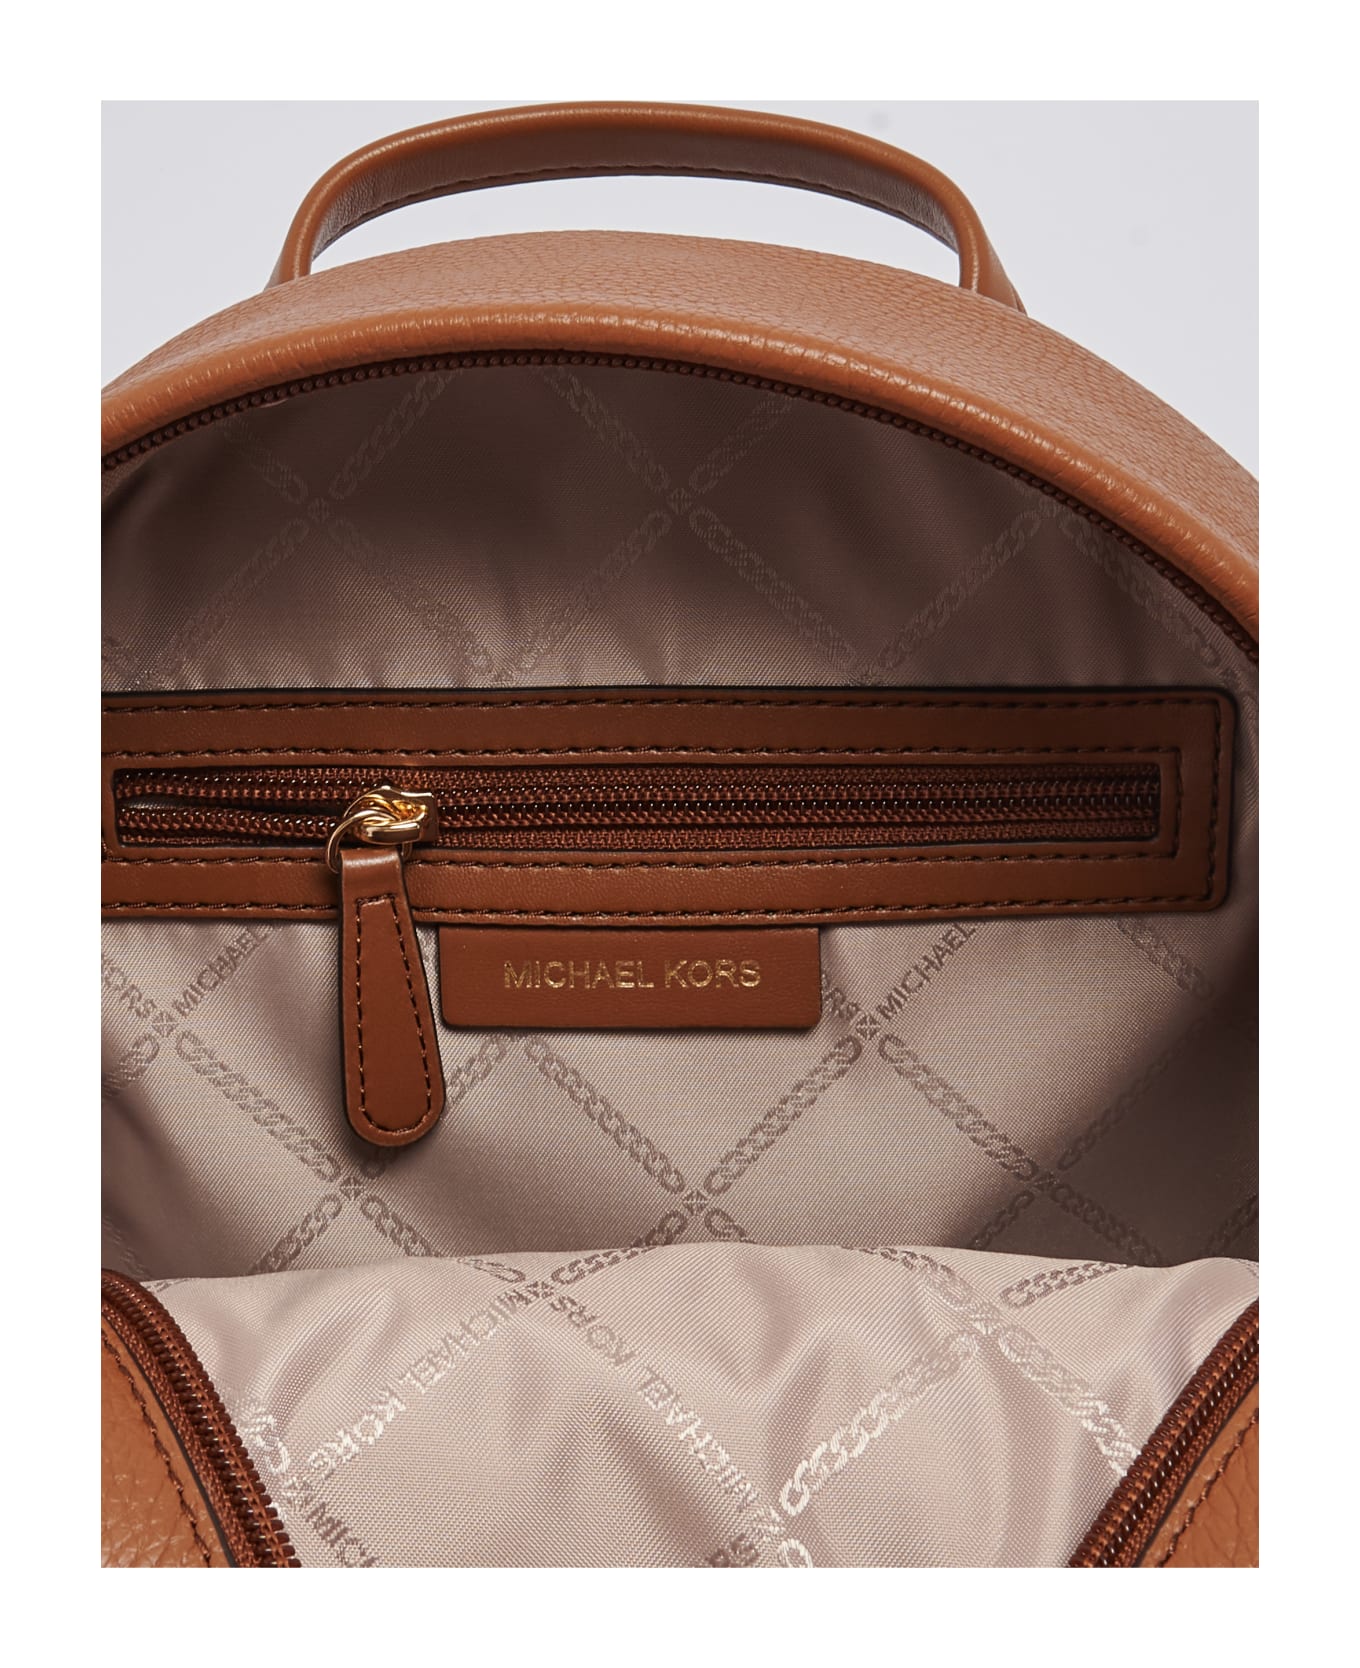 Michael Kors Md Backpack Backpack - CUOIO バックパック